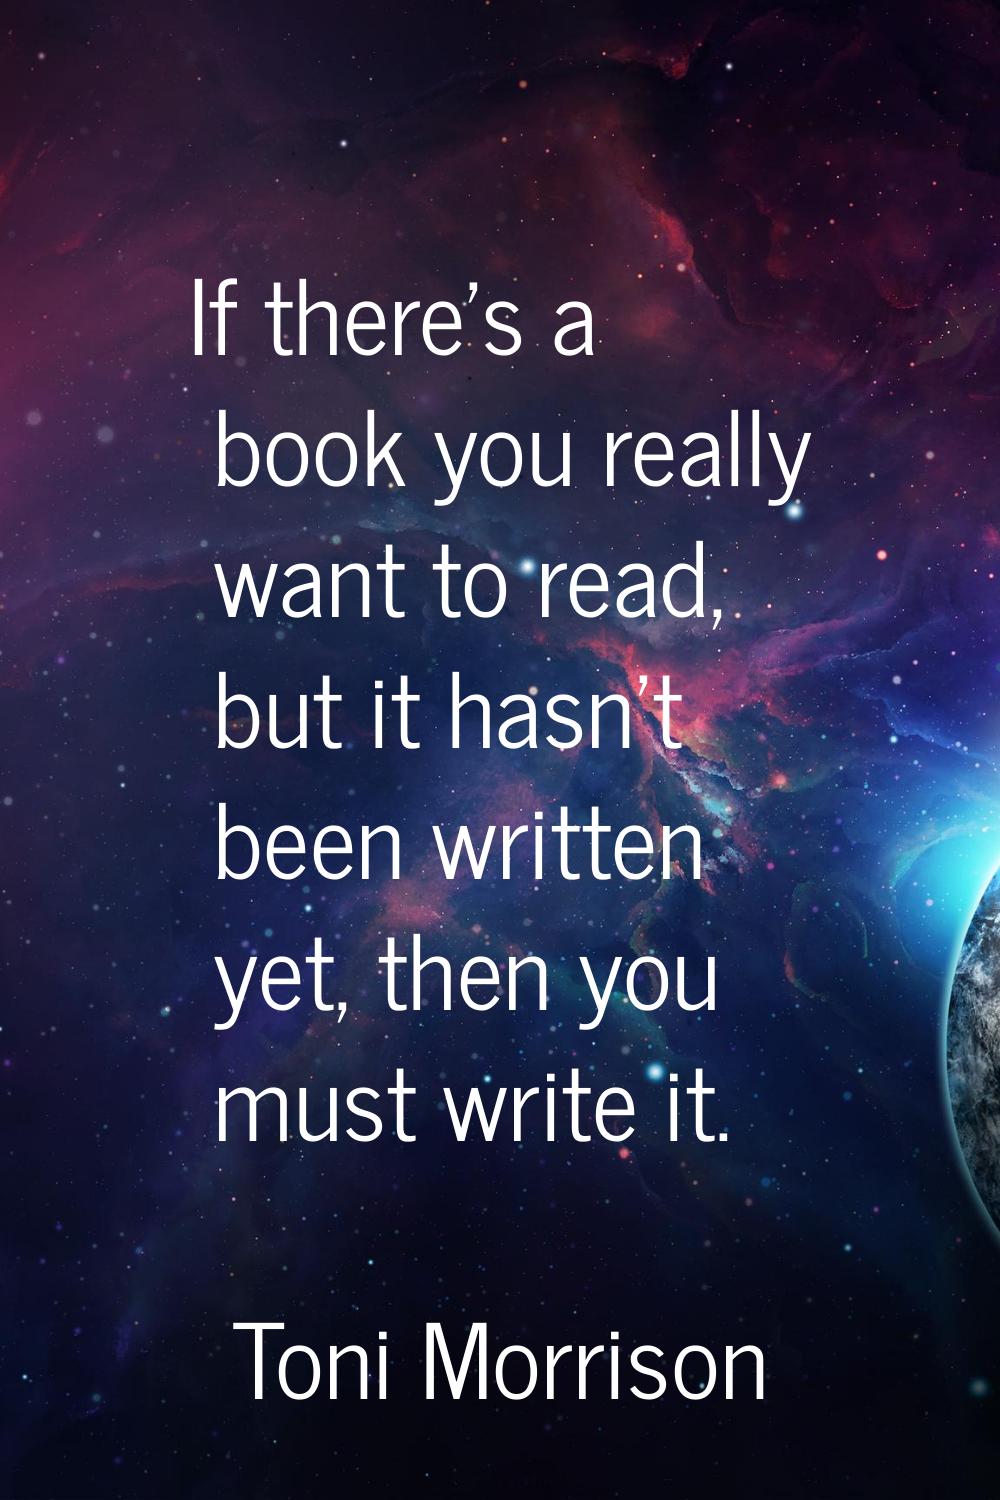 If there's a book you really want to read, but it hasn't been written yet, then you must write it.